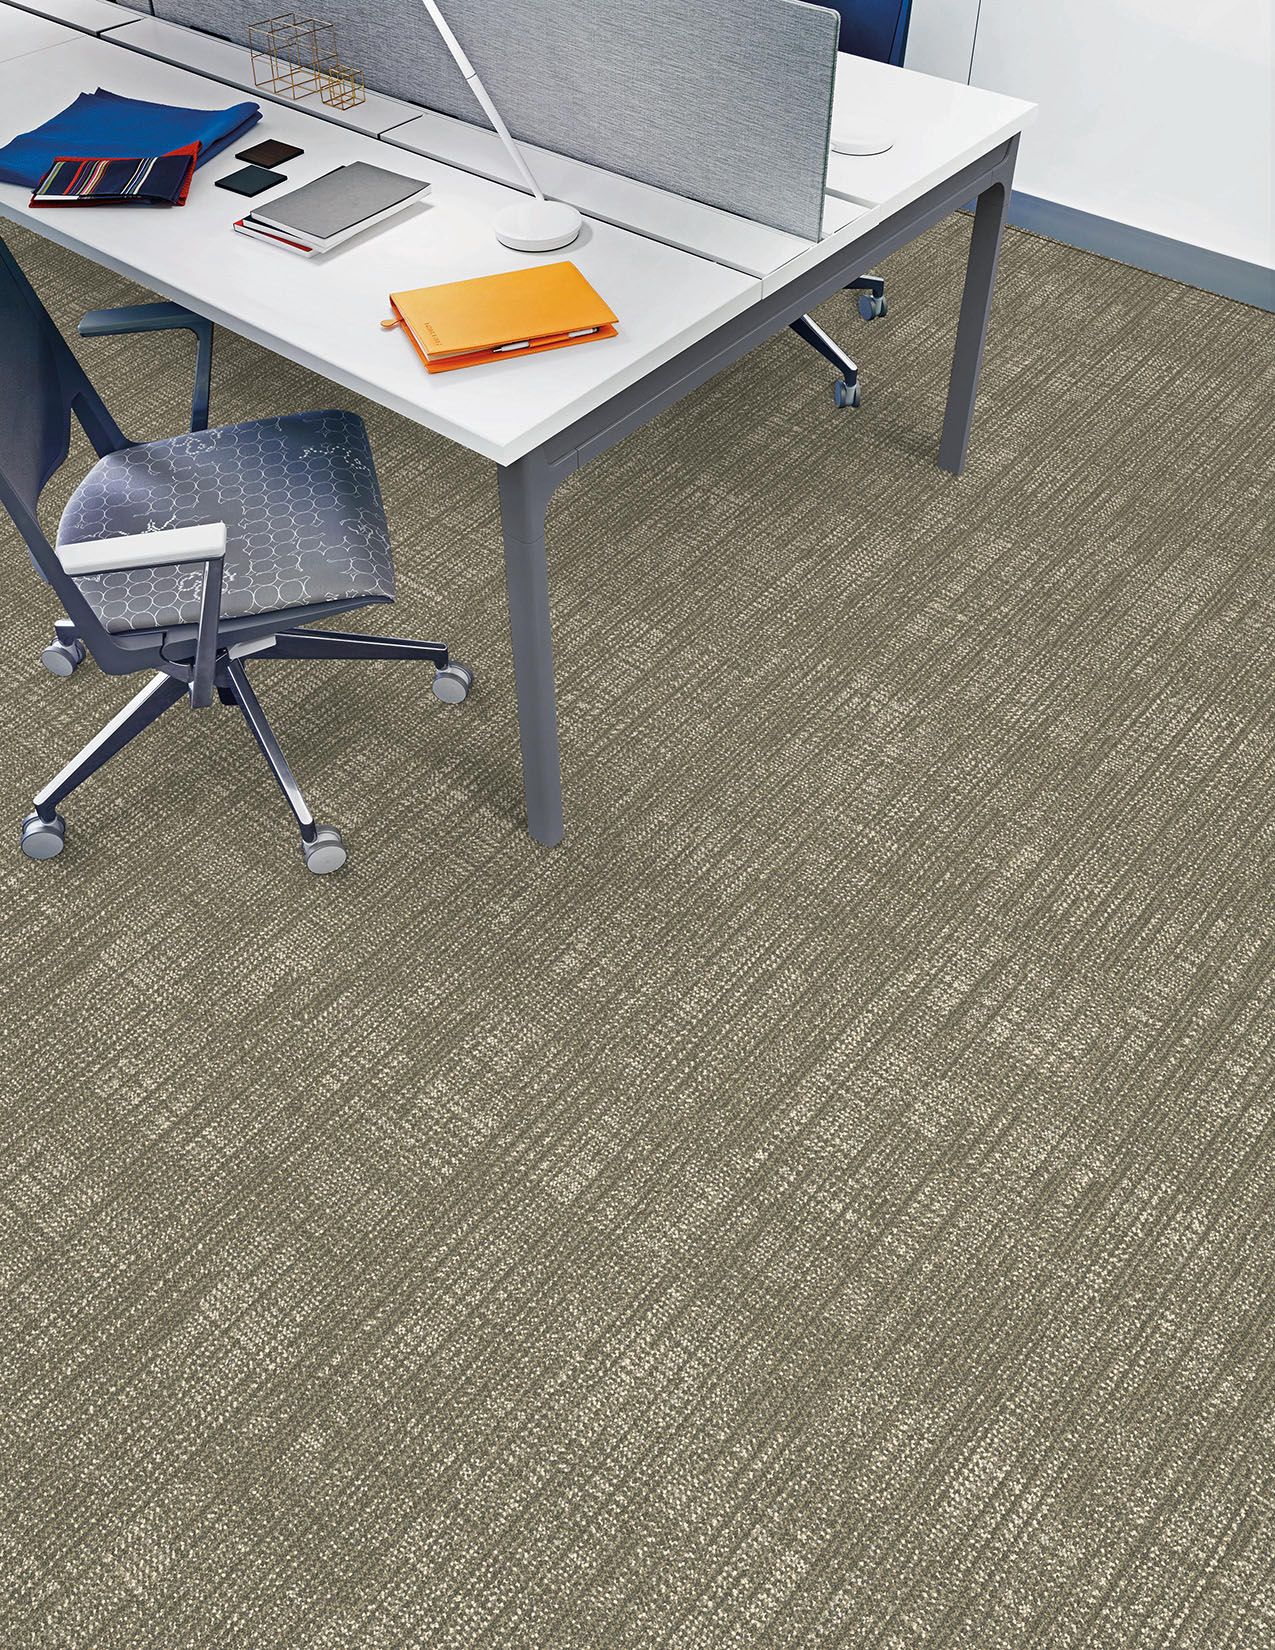 Interface Screen Print plank carpet tile in office with chair and desk numéro d’image 3